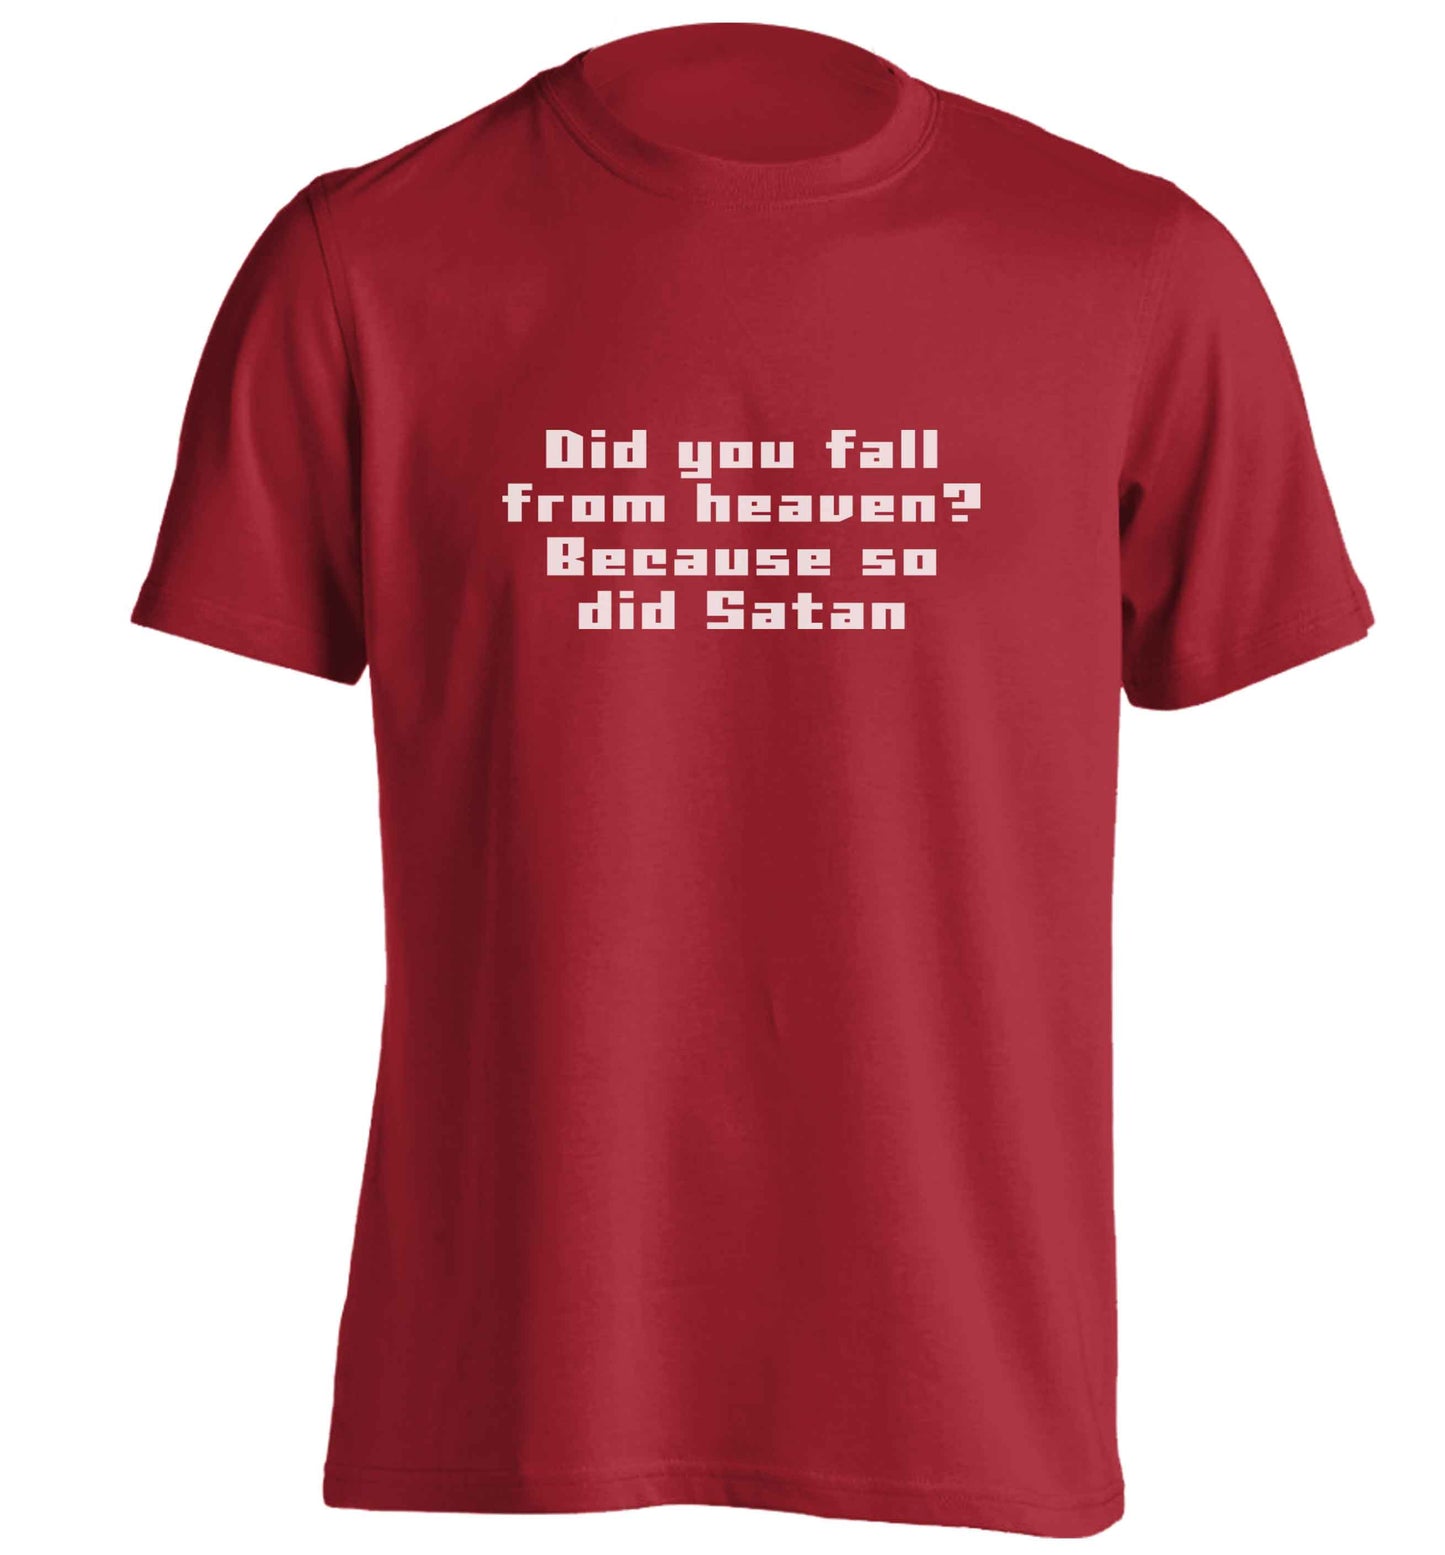 Did you fall from Heaven because so did Satan adults unisex red Tshirt 2XL